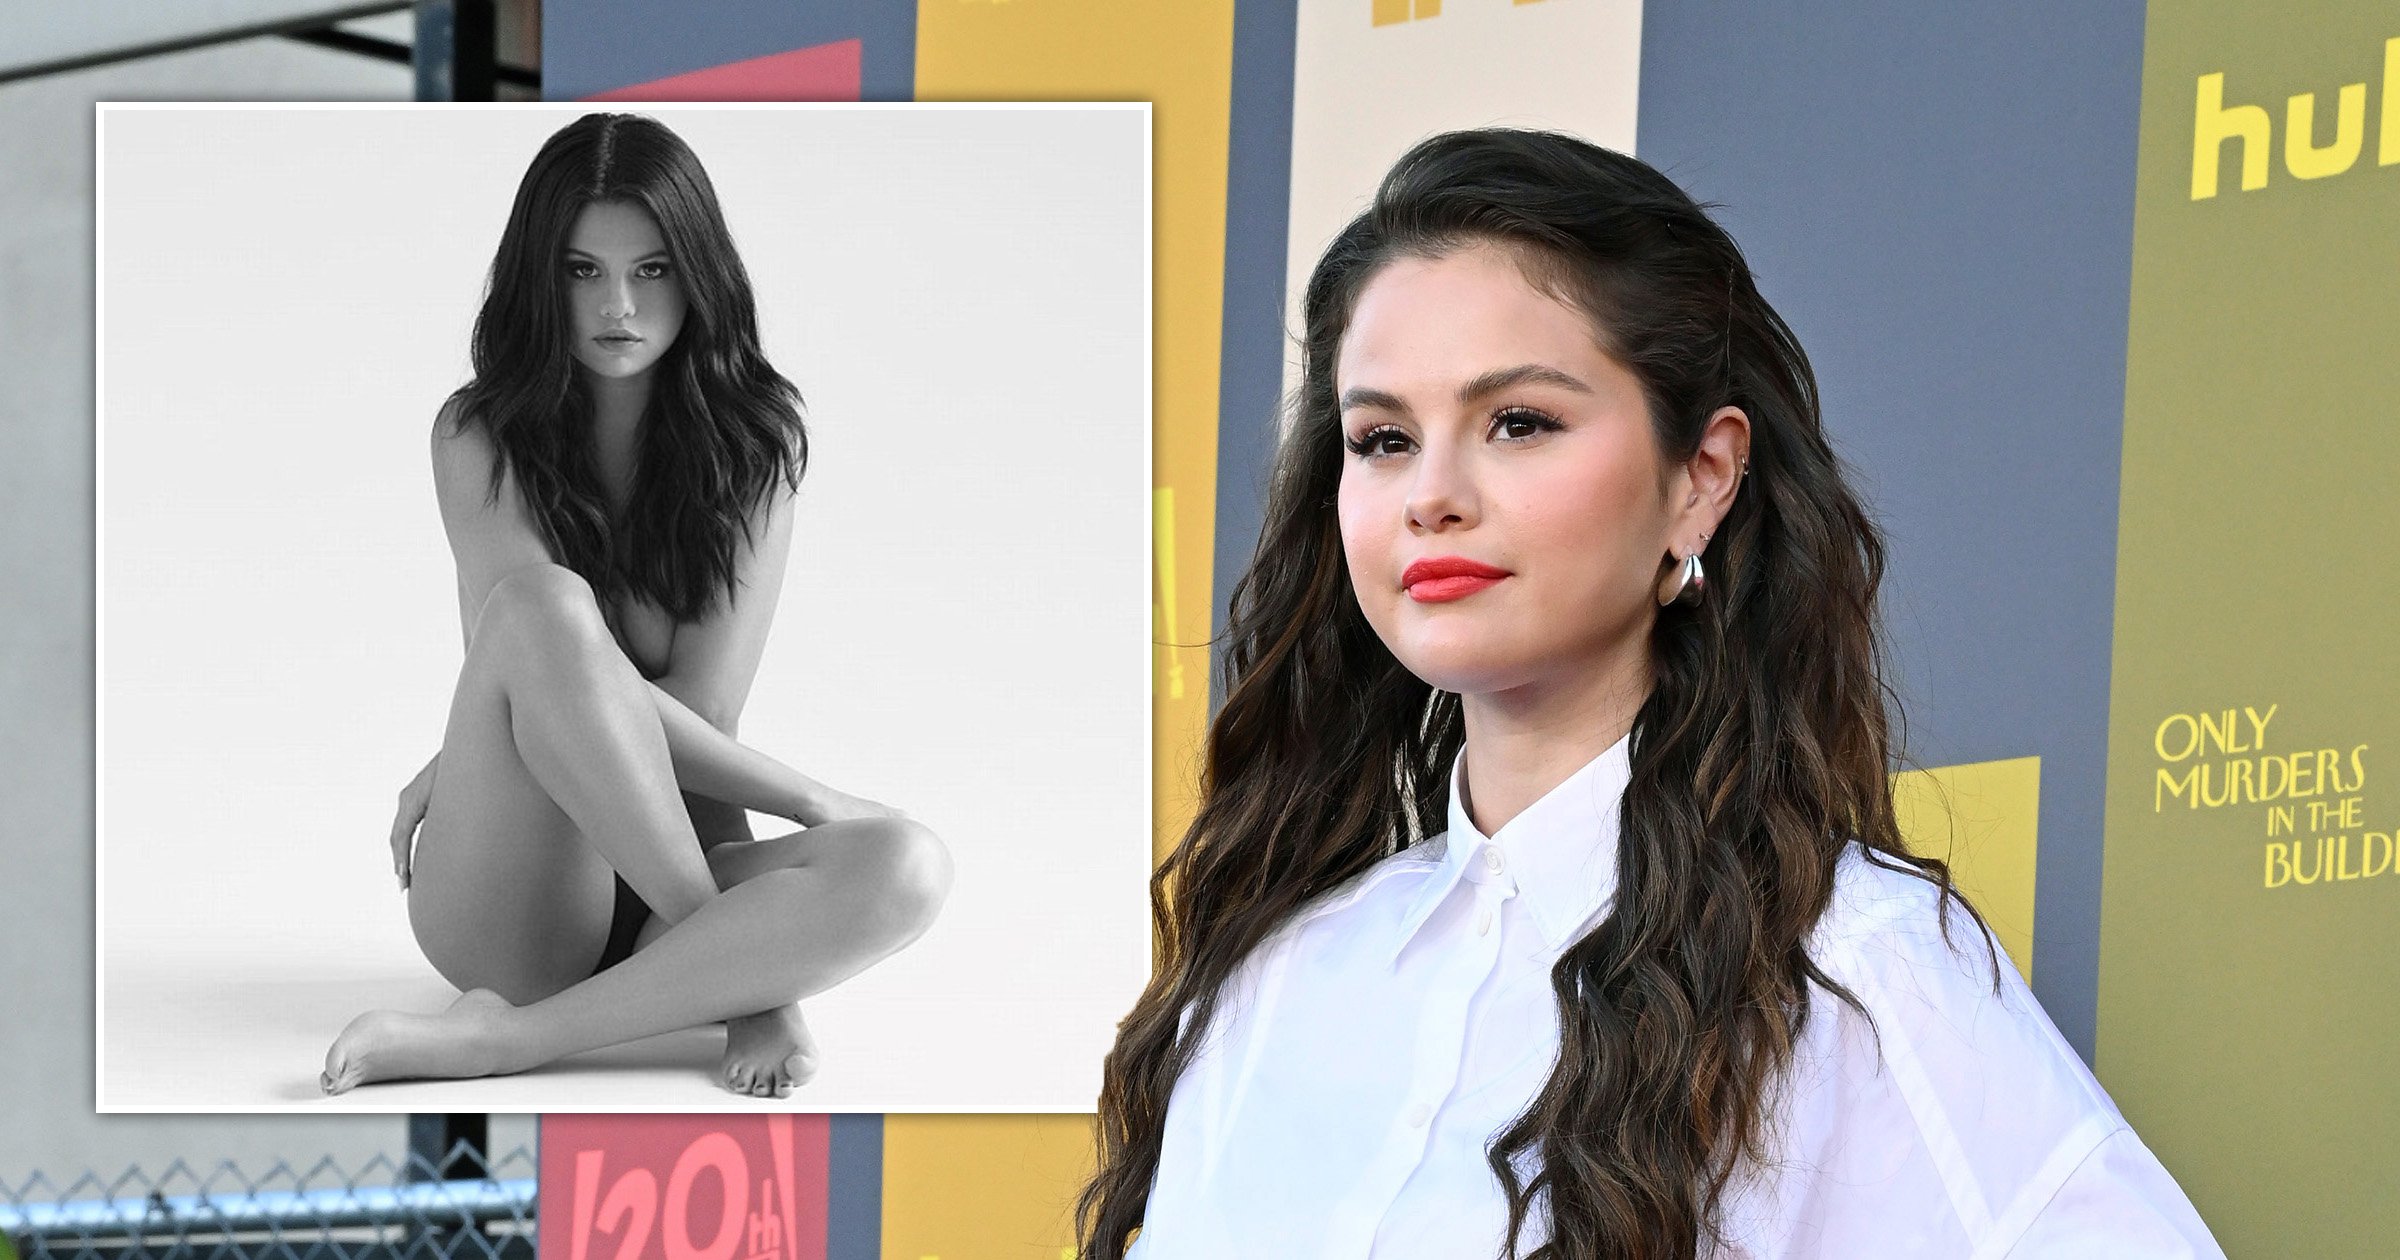 deidre pettit recommends Did Selena Gomez Really Pose For Playboy